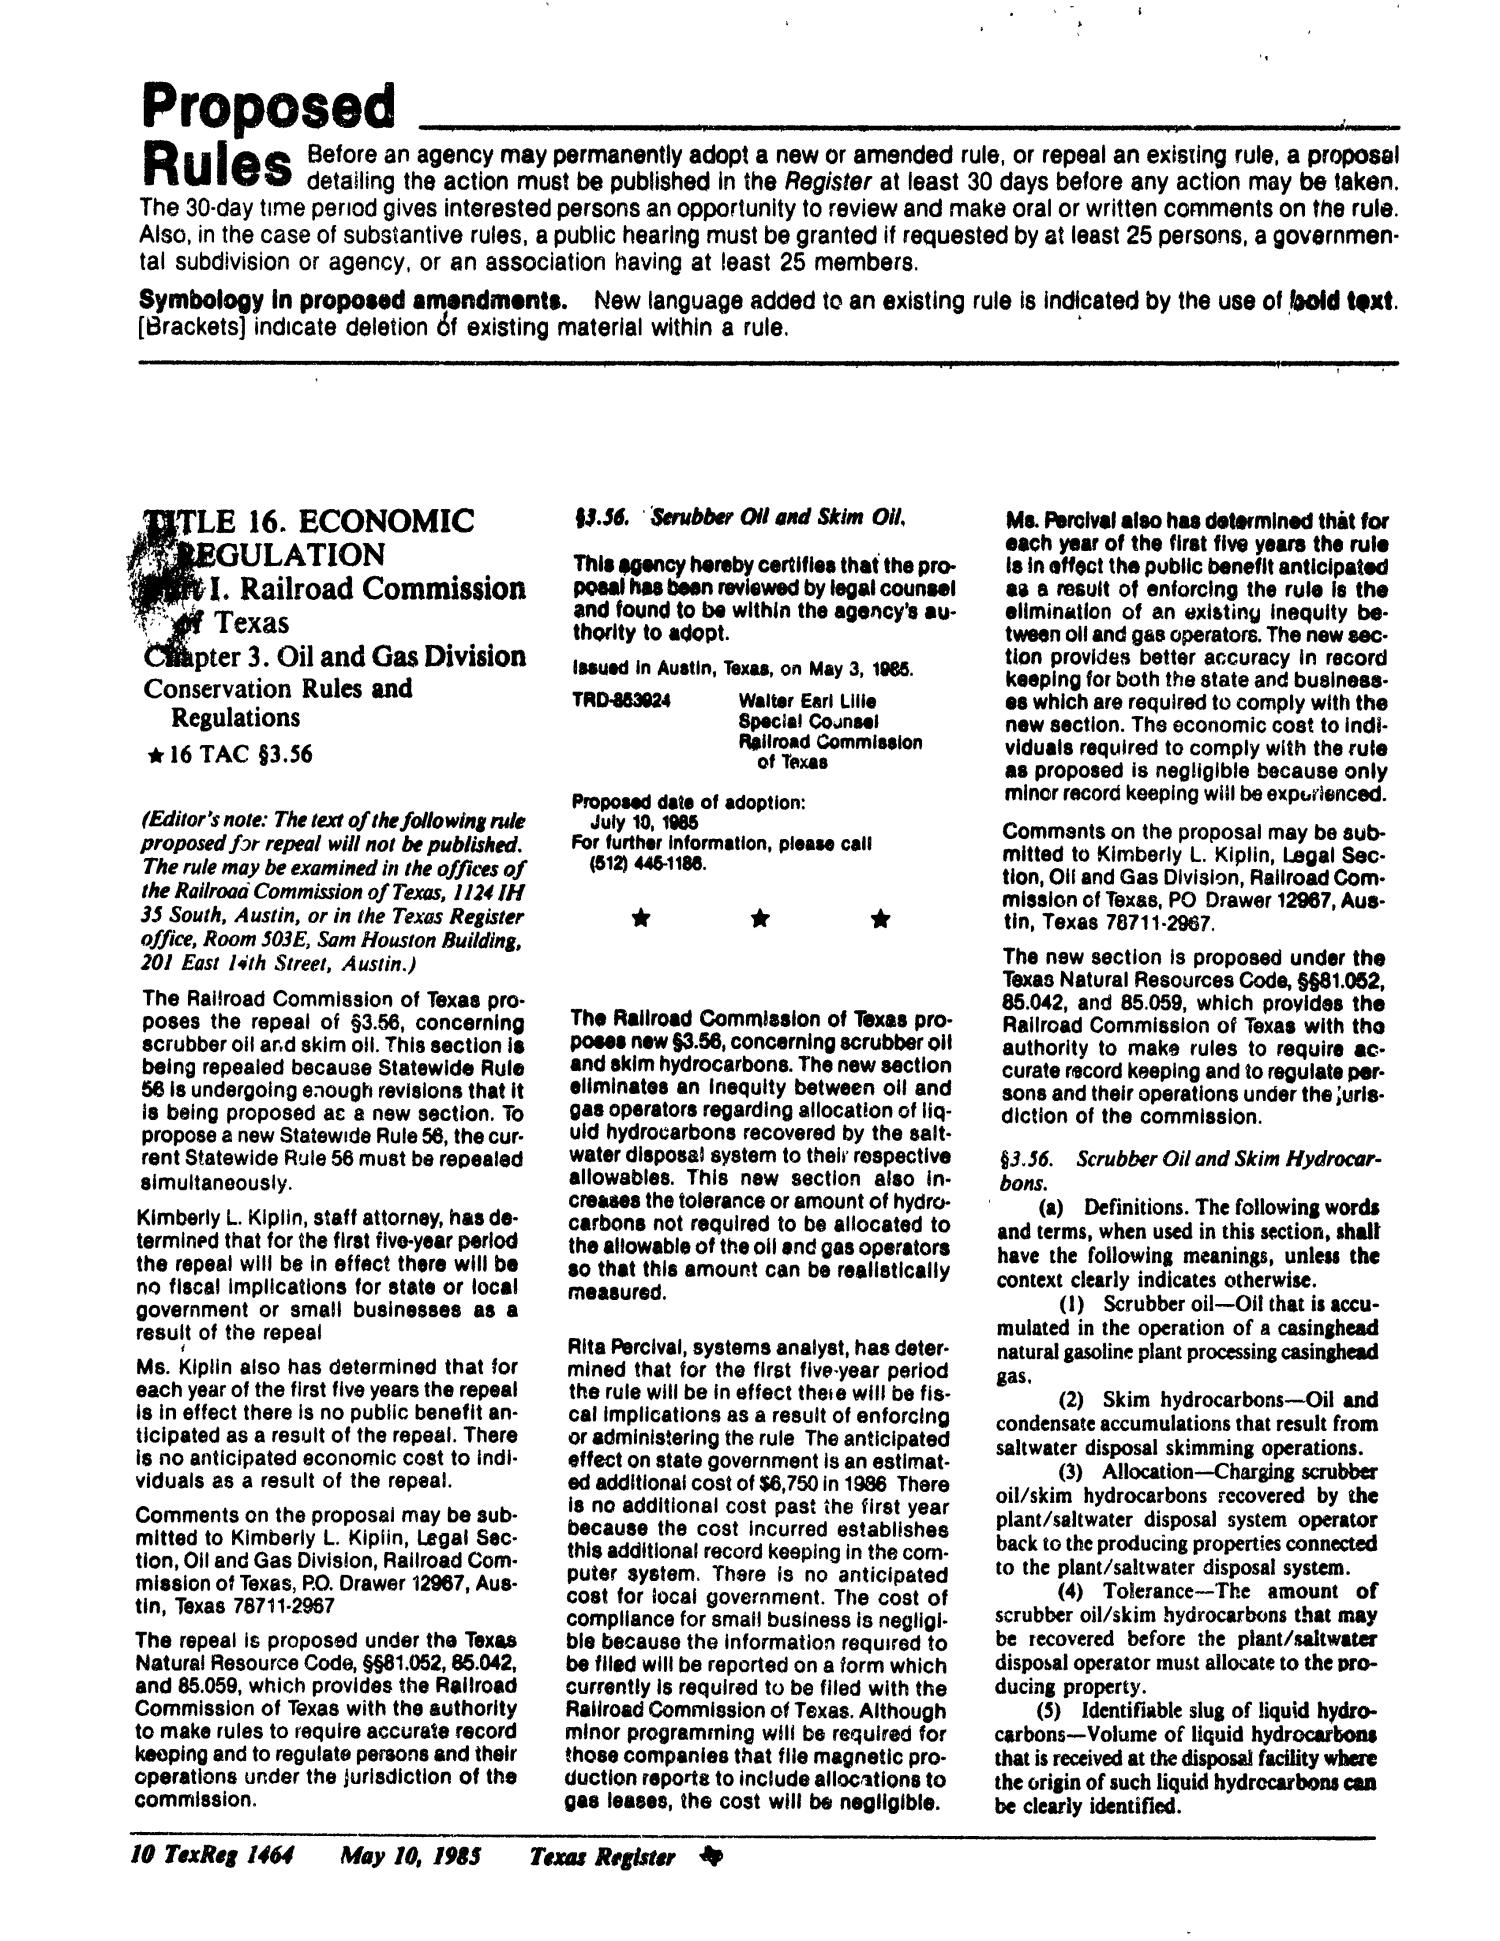 Texas Register, Volume 10, Number 36, Pages 1459-1518, May 10, 1985
                                                
                                                    1464
                                                